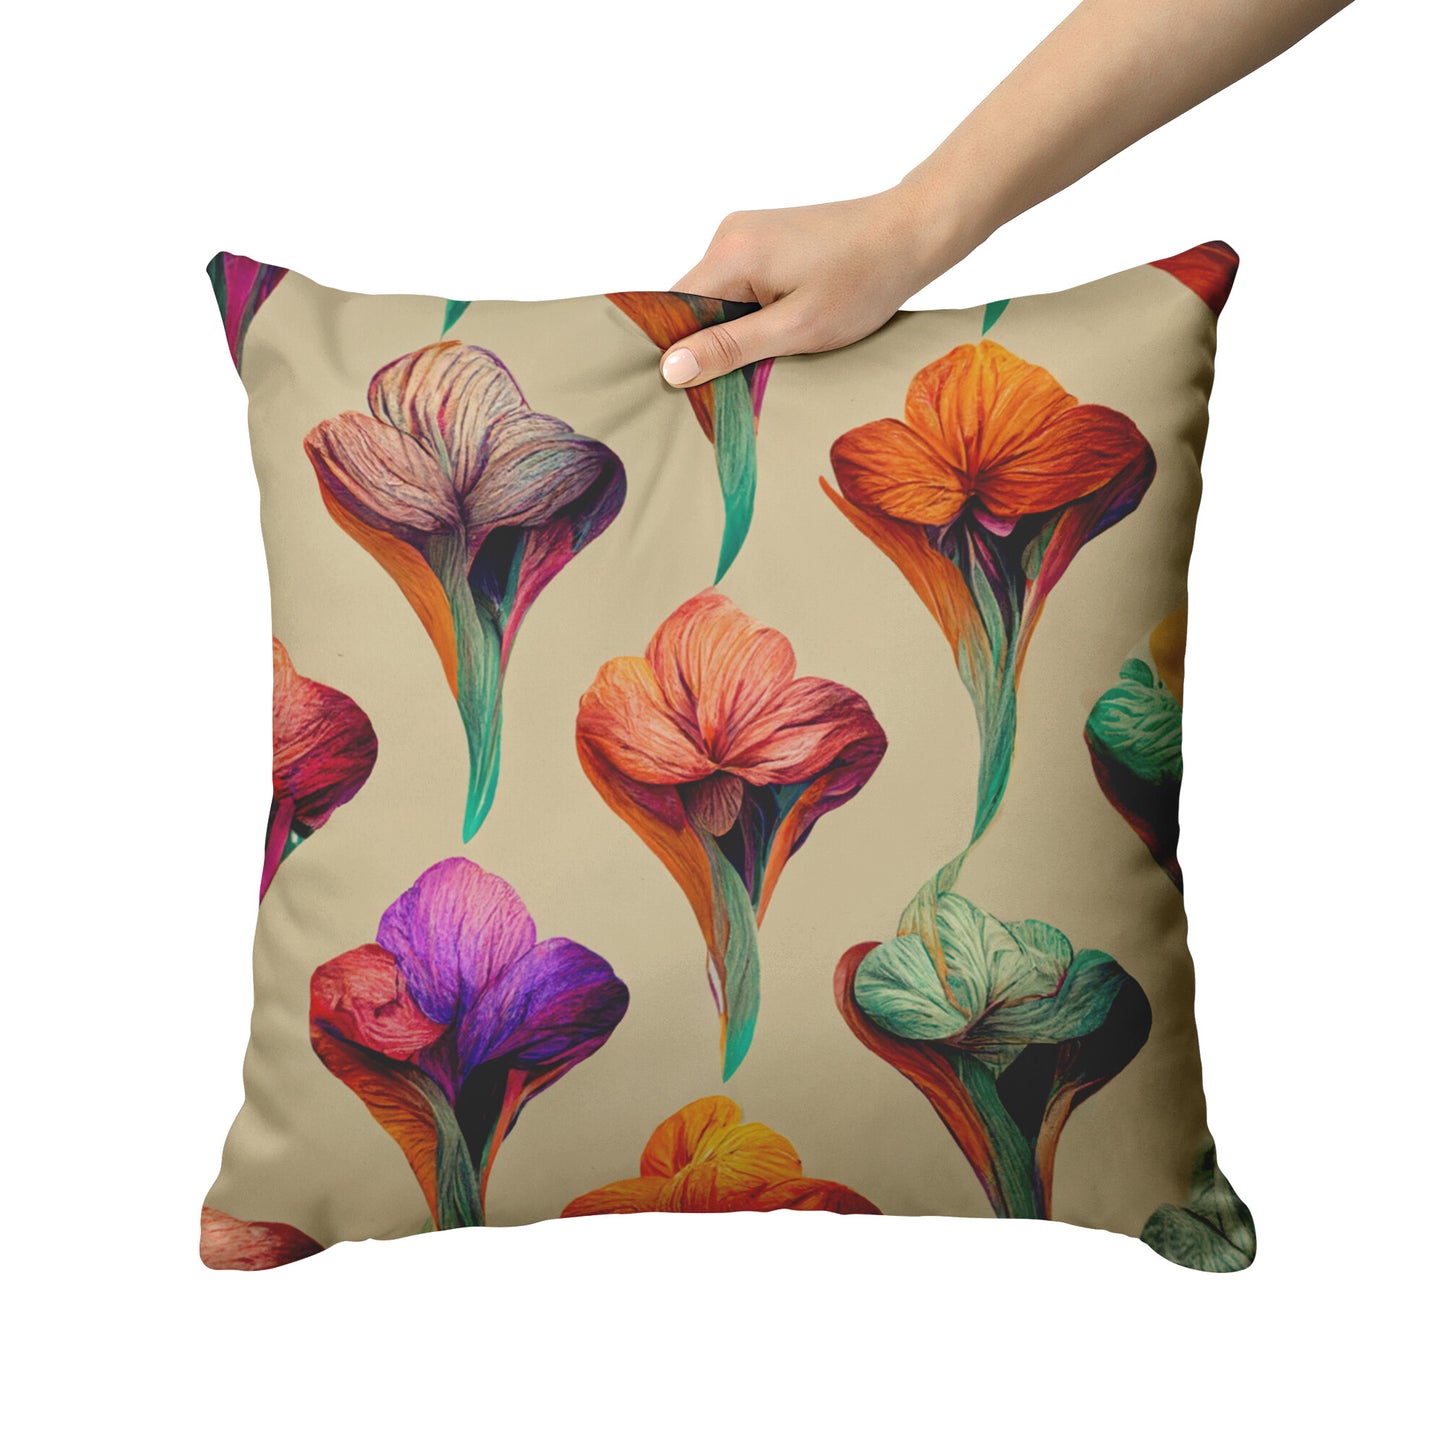 Scandi Floral Throw Pillow, Colorful Floral Throw Pillow